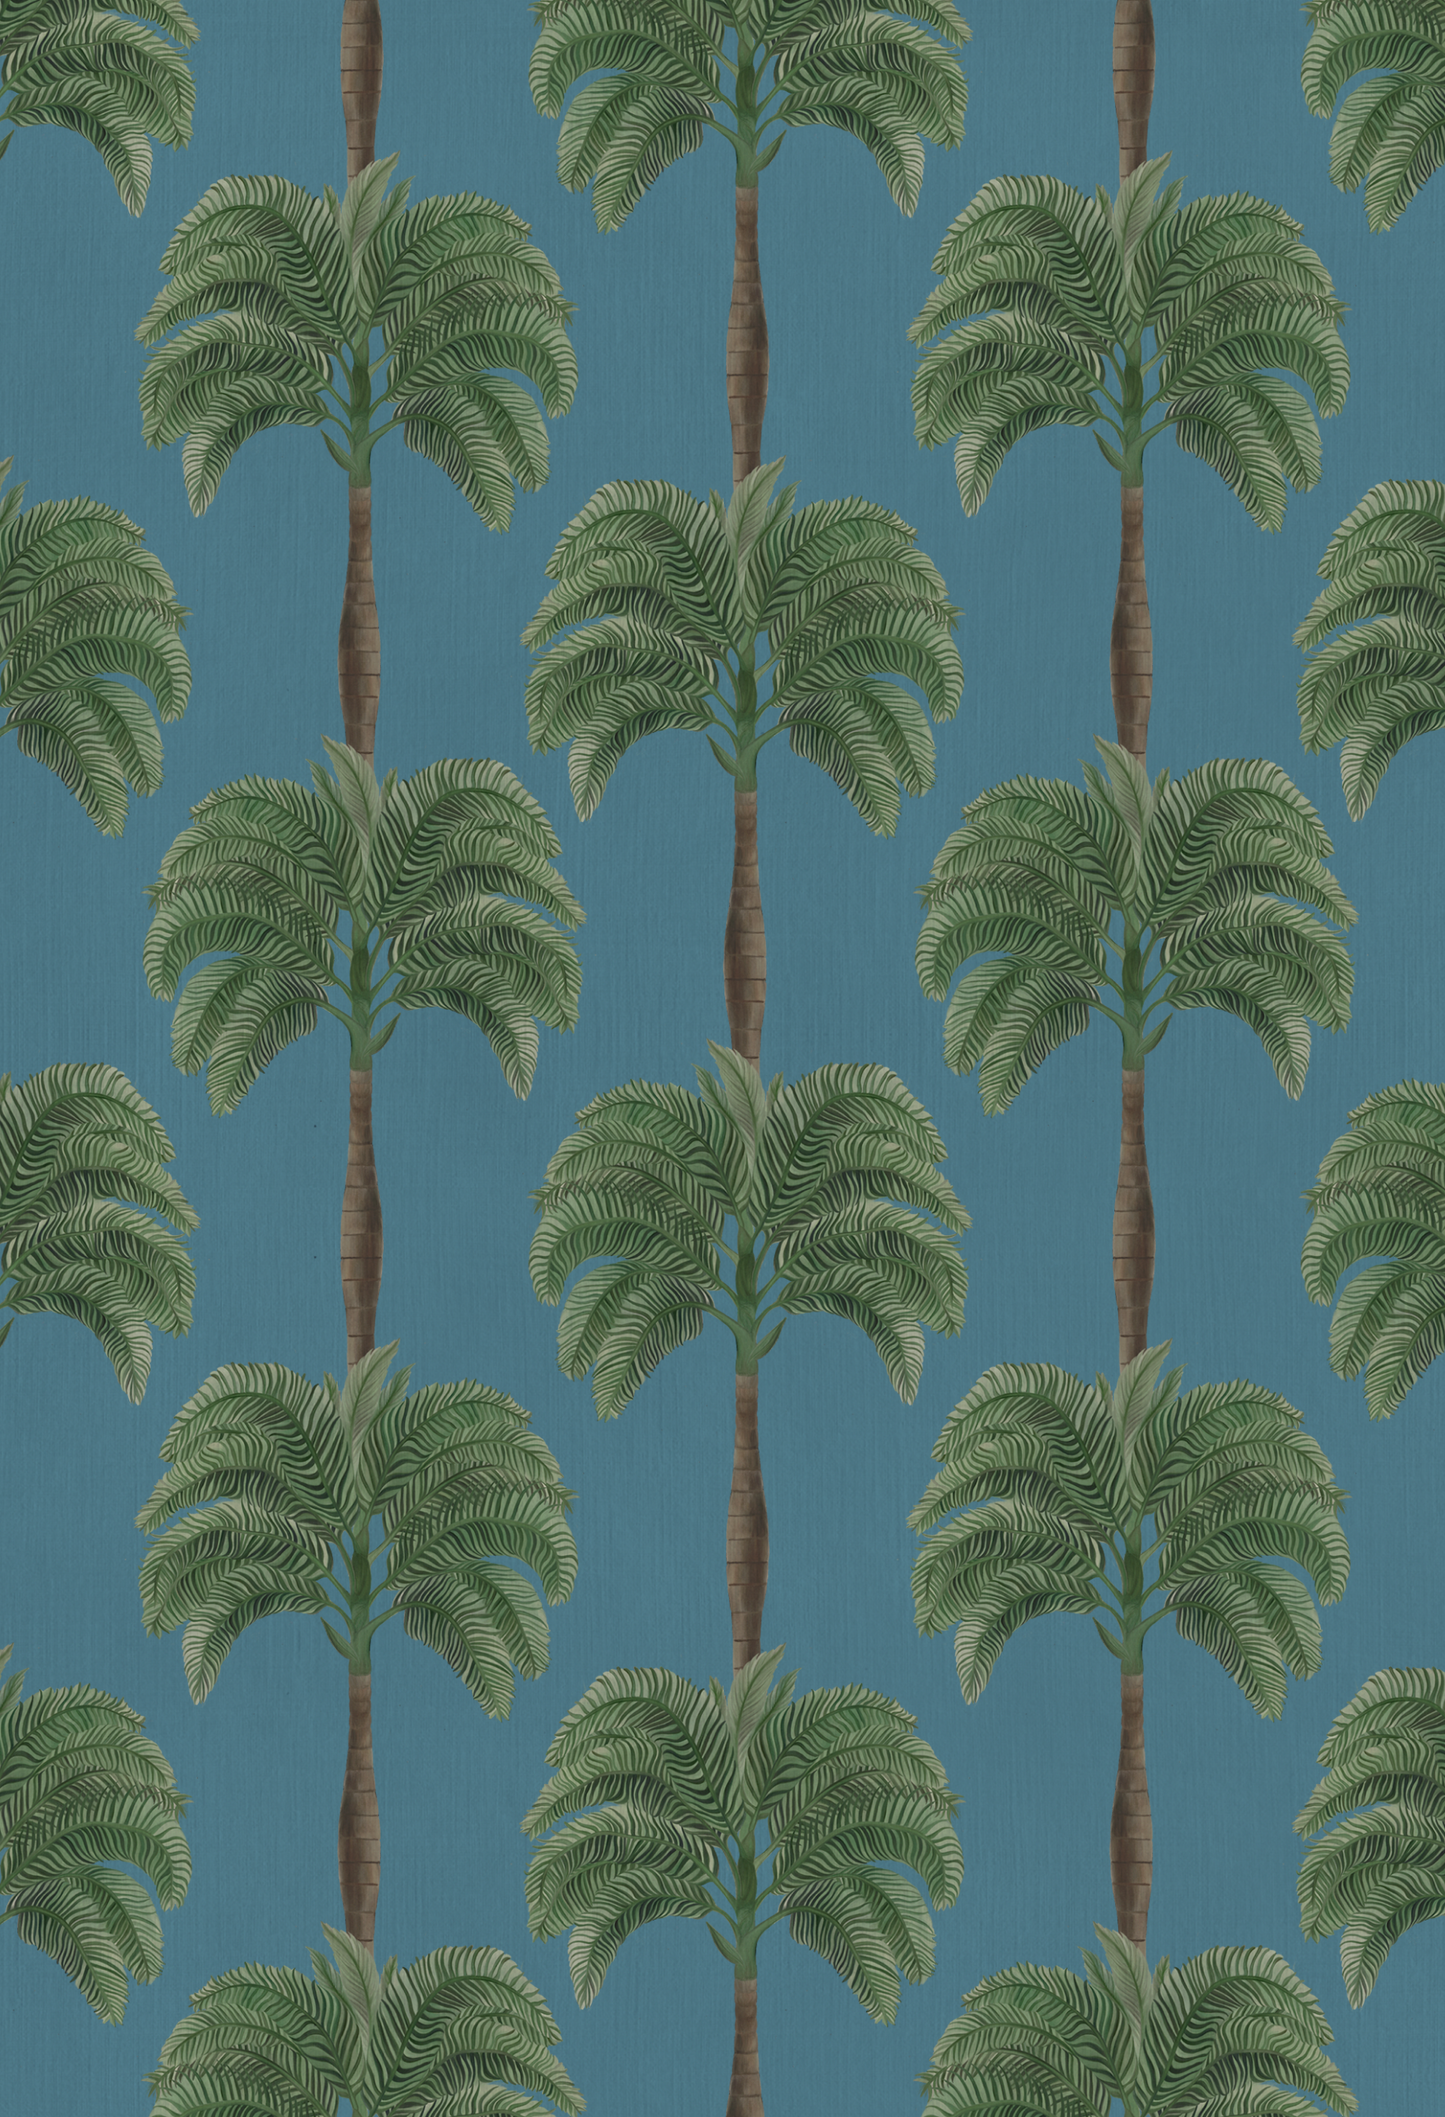 Luxurious Little Palma Wallpaper in Lagoon by Deus ex Gardenia with a botanical palm tree pattern on a blue background.